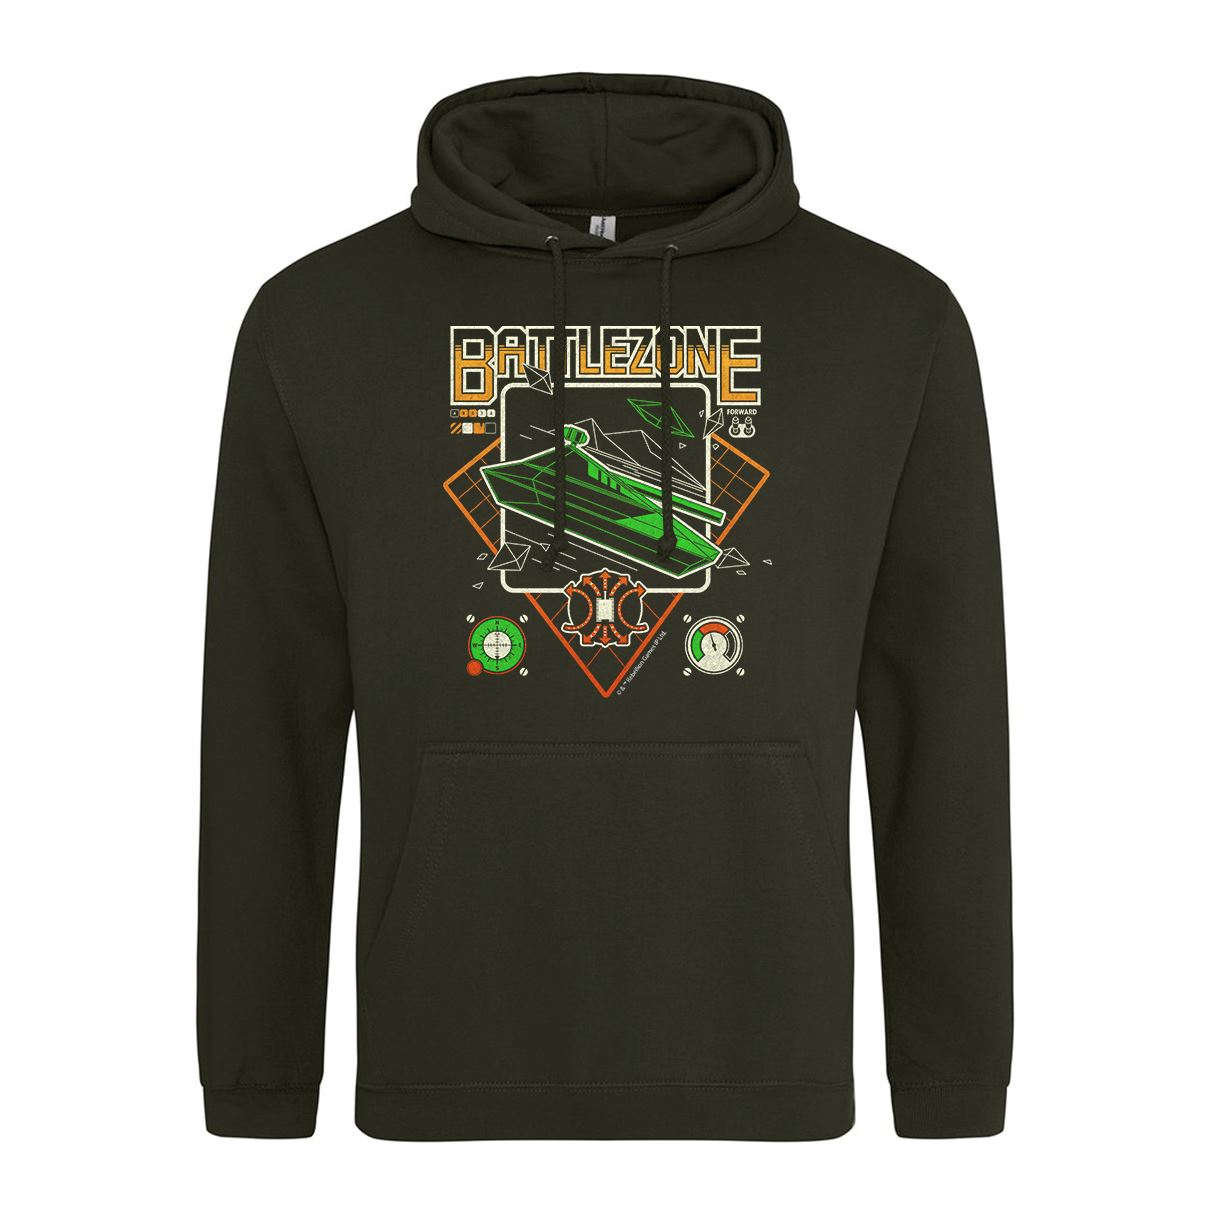 Battlezone Retro Arcade Gaming Hoodie Hoodie Seven Squared Small 36" Chest Combat Green 